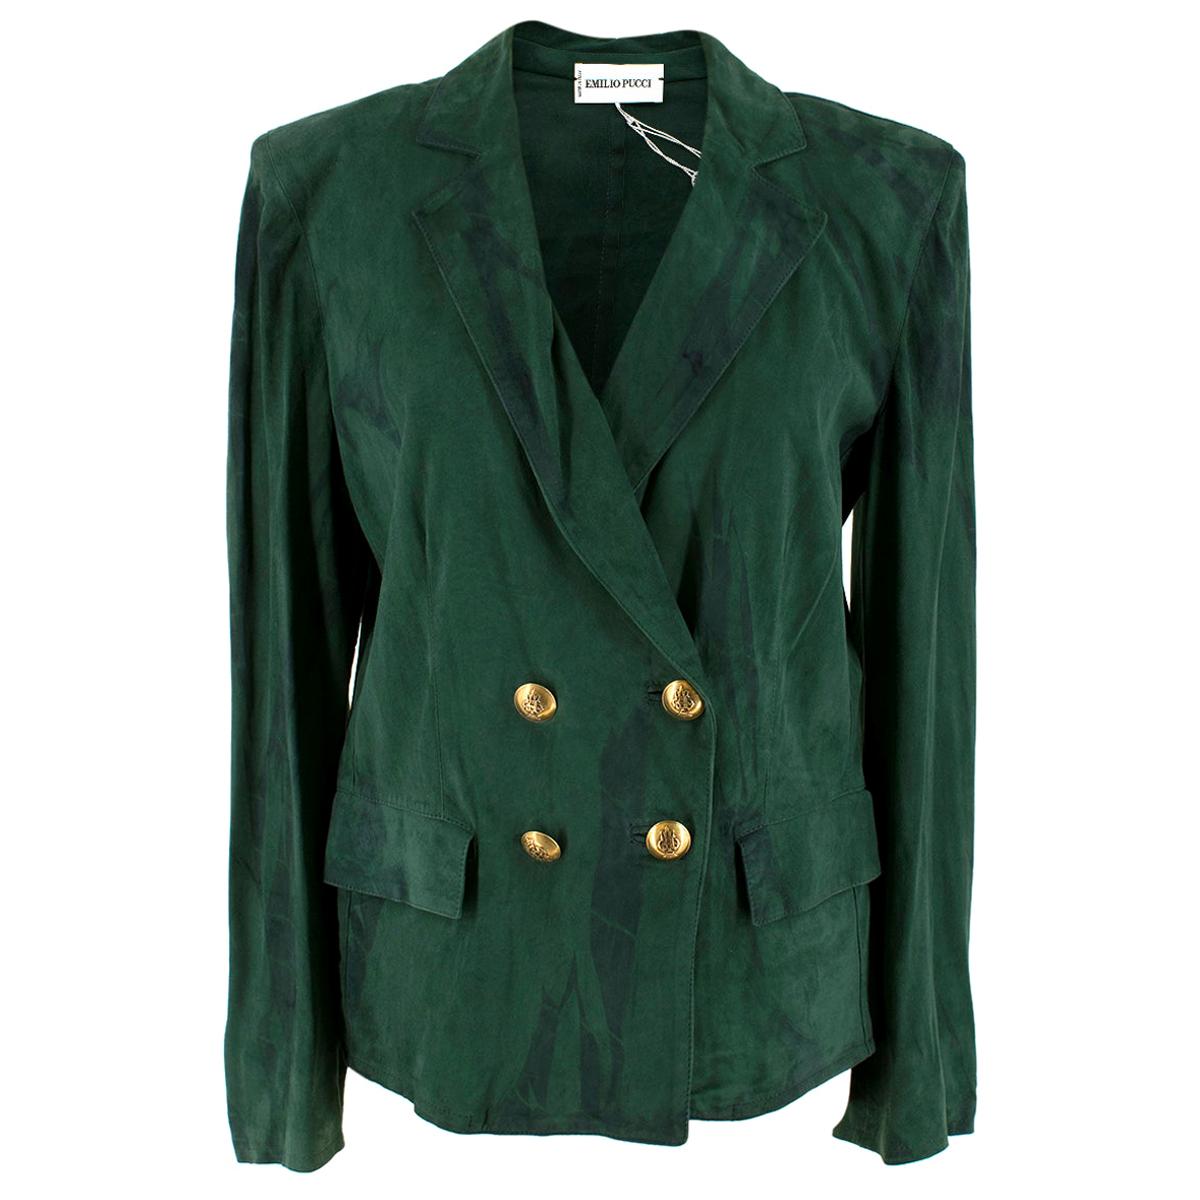 Emilio Pucci Green Double-Breasted Suede Blazer Jacket UK 10